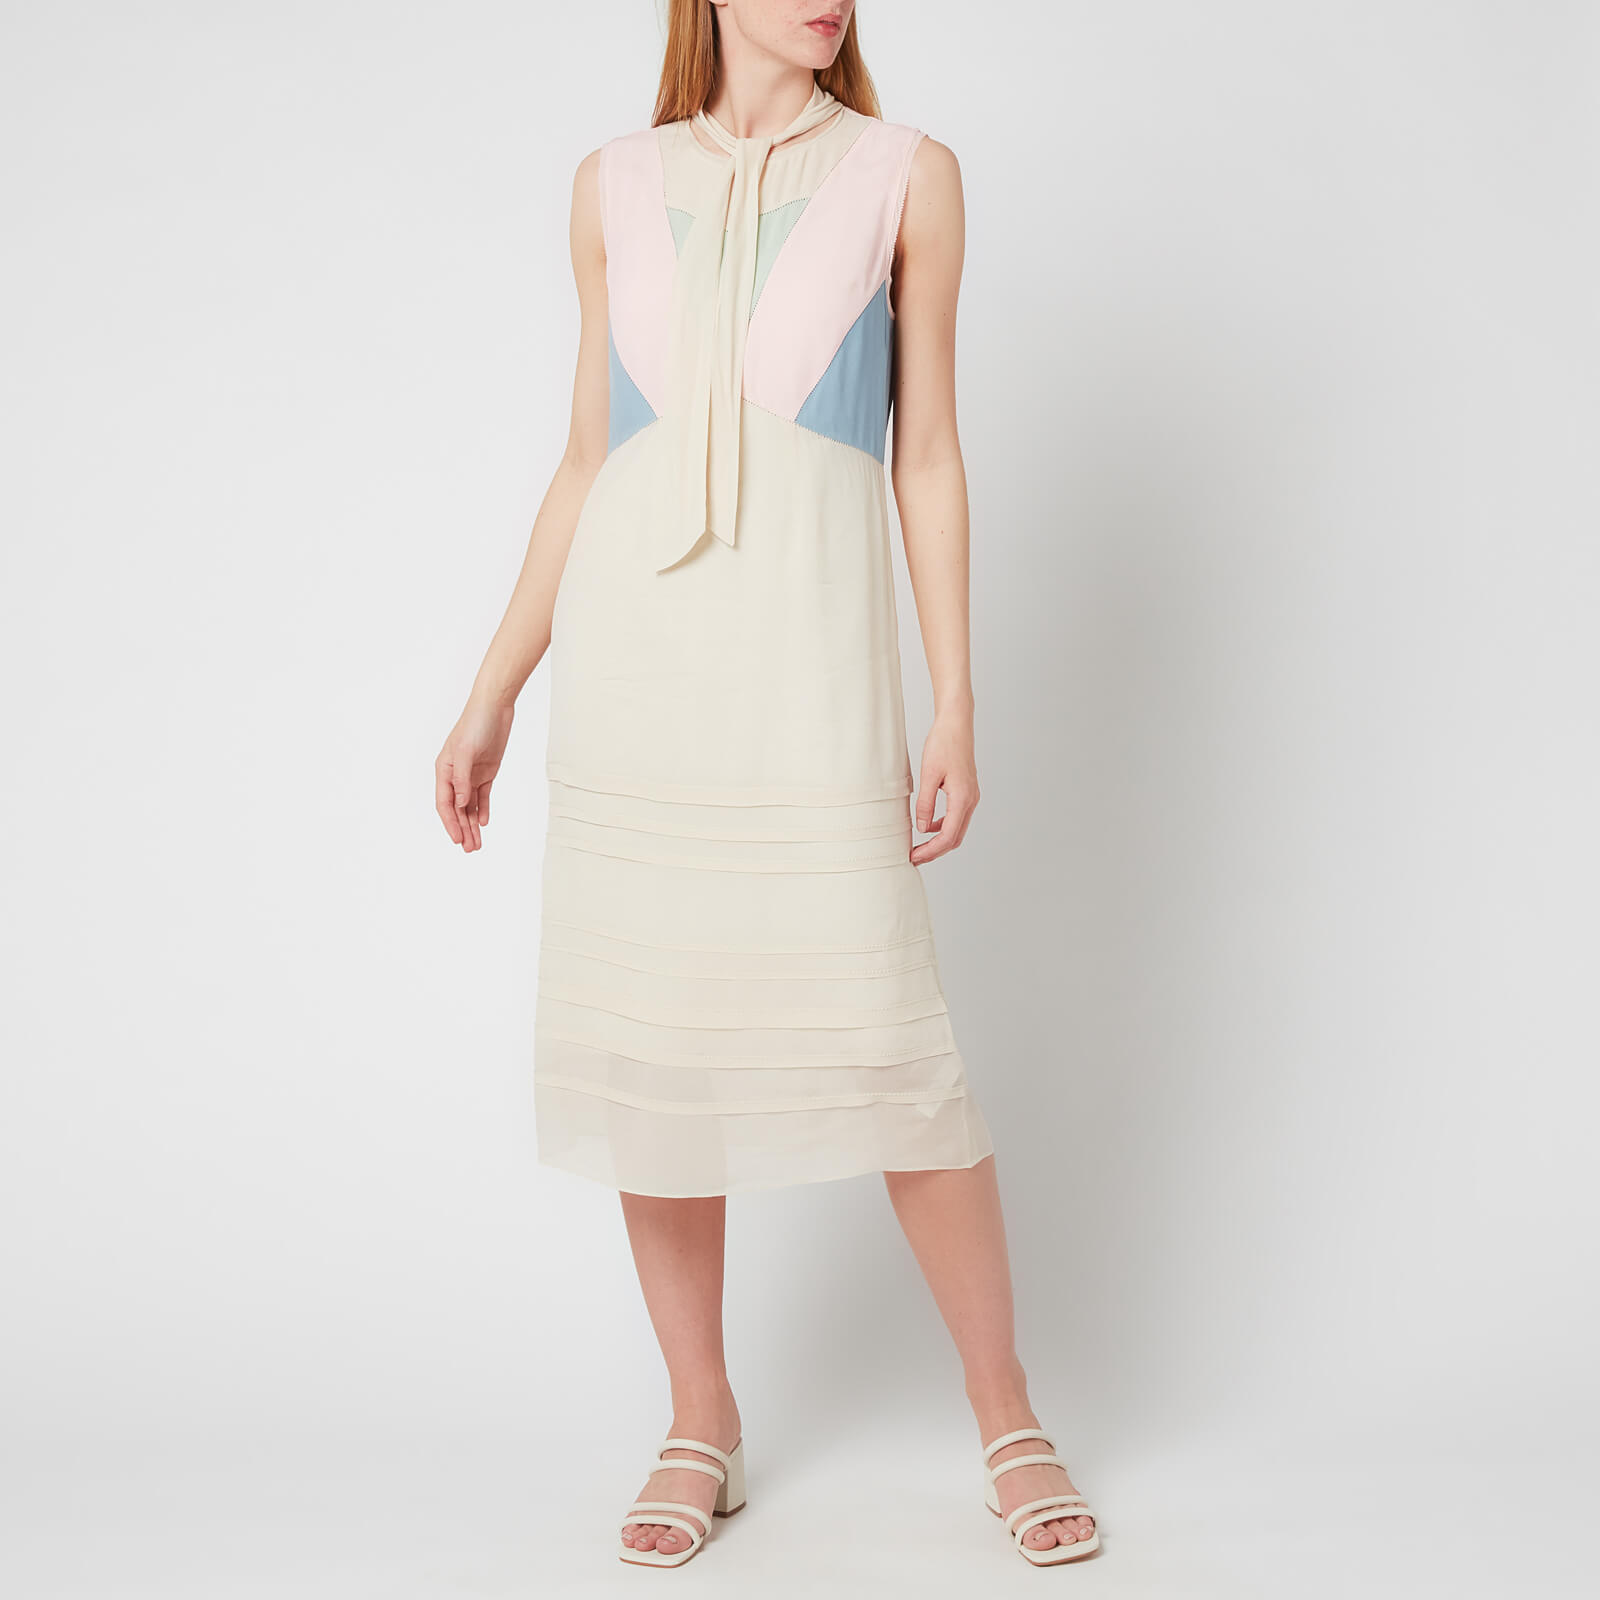 Coach Women's Paint By Numbers Dress - Pale Yellow - US 2/UK 6